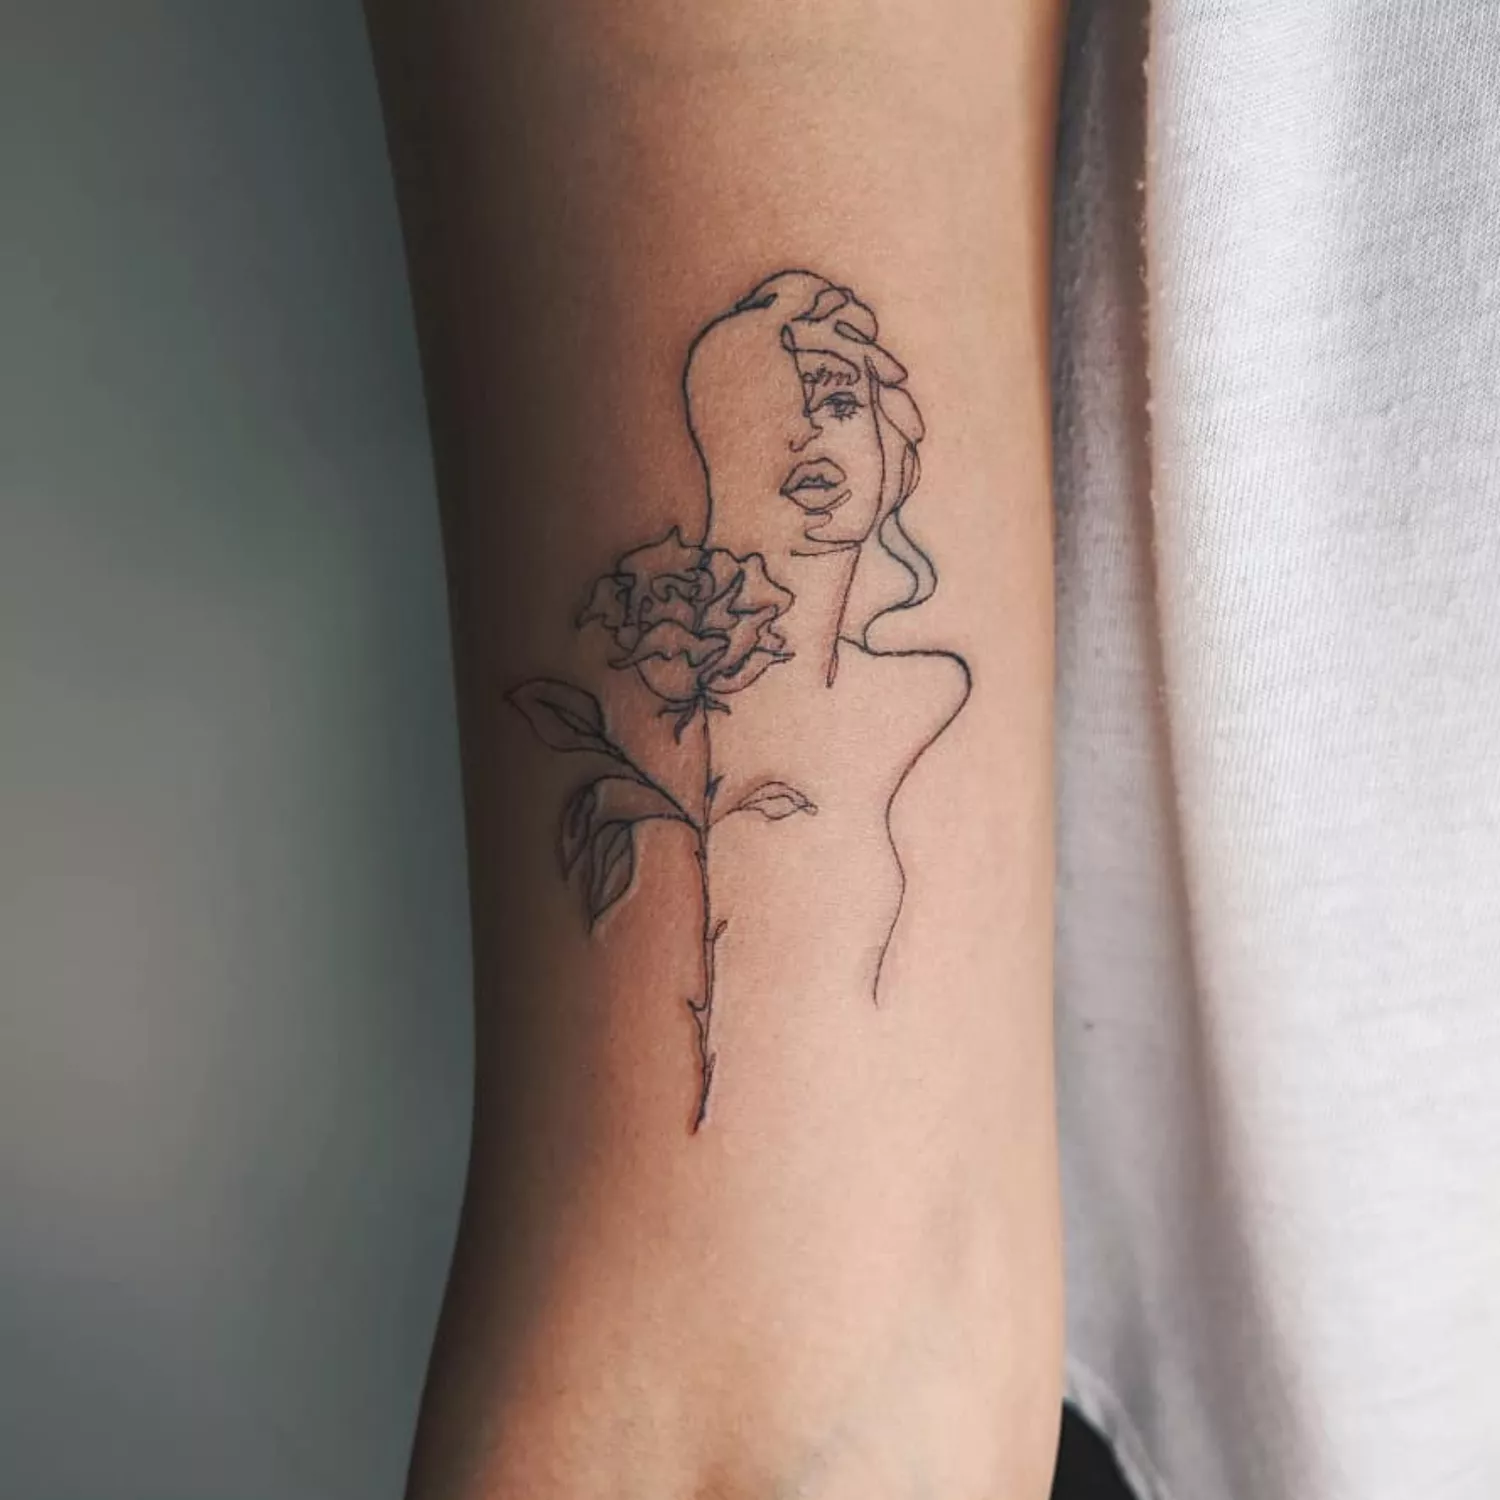 A close up of a portrait tattoo of a woman paired with a rose.